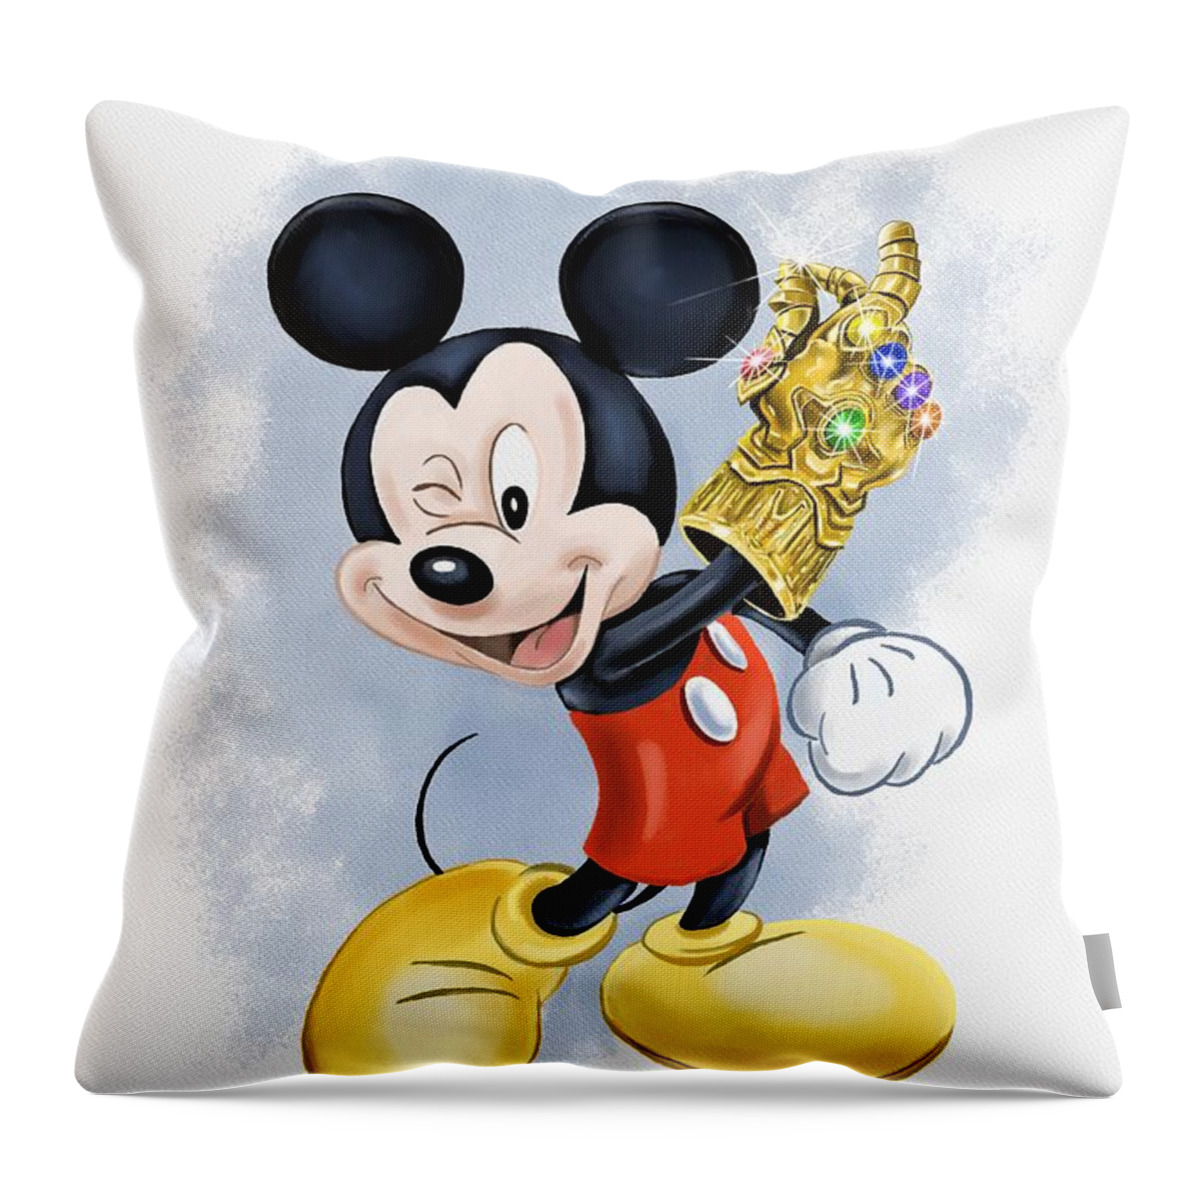 Mouse Throw Pillow featuring the digital art When You Wish Upon a Snap by Norman Klein